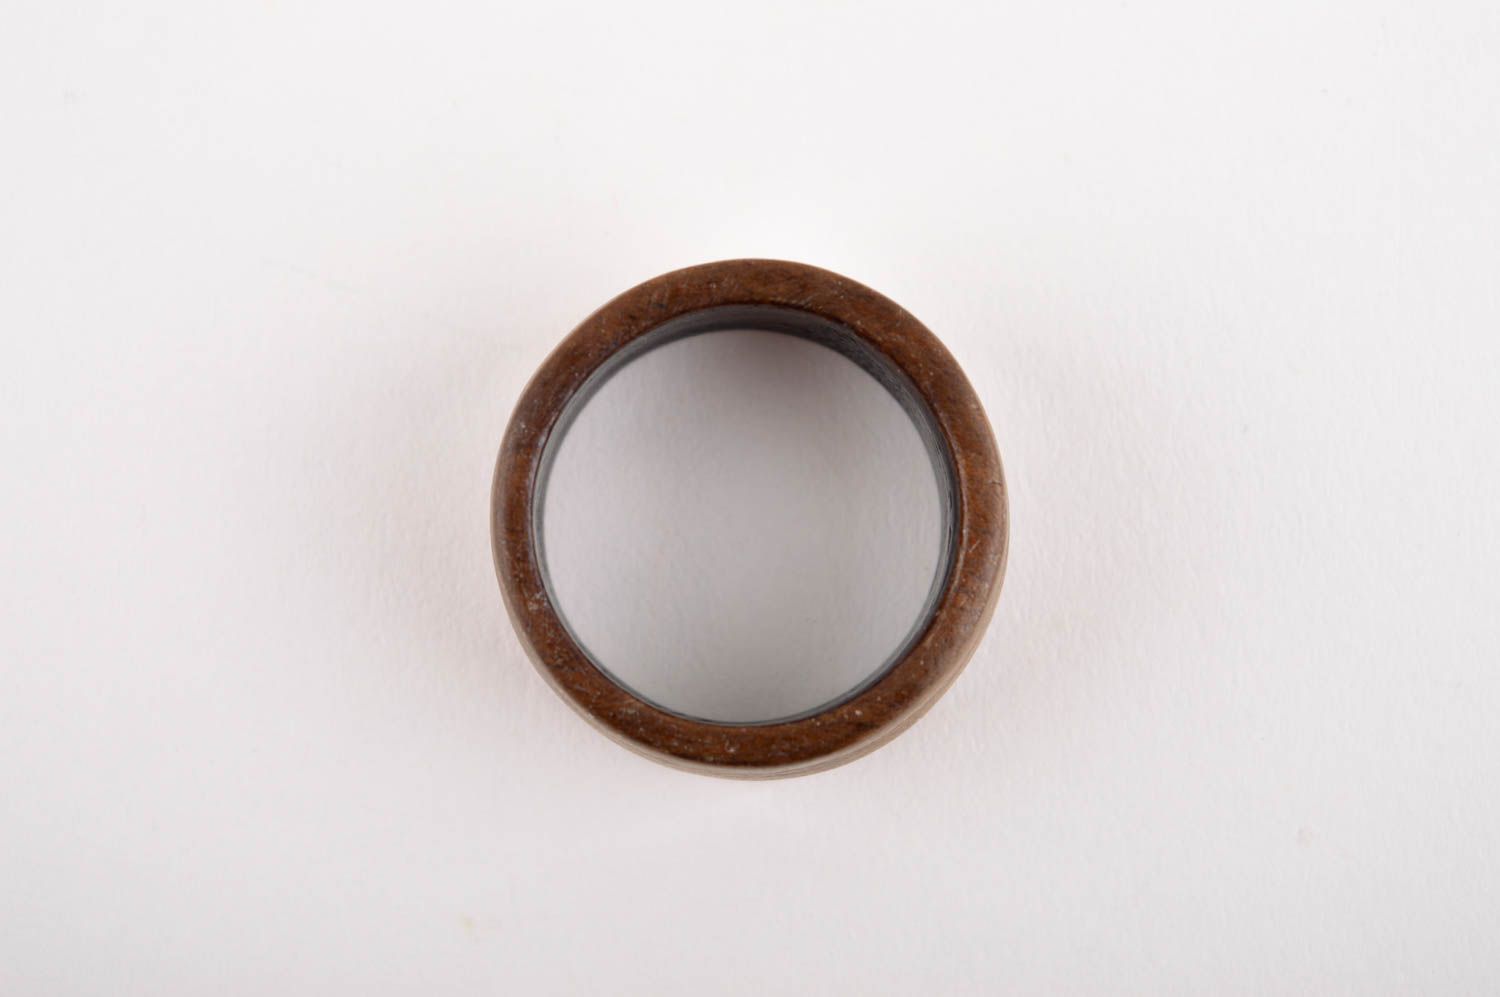 Handmade jewelry ring wooden jewelry fashion rings women accessories gift ideas photo 4